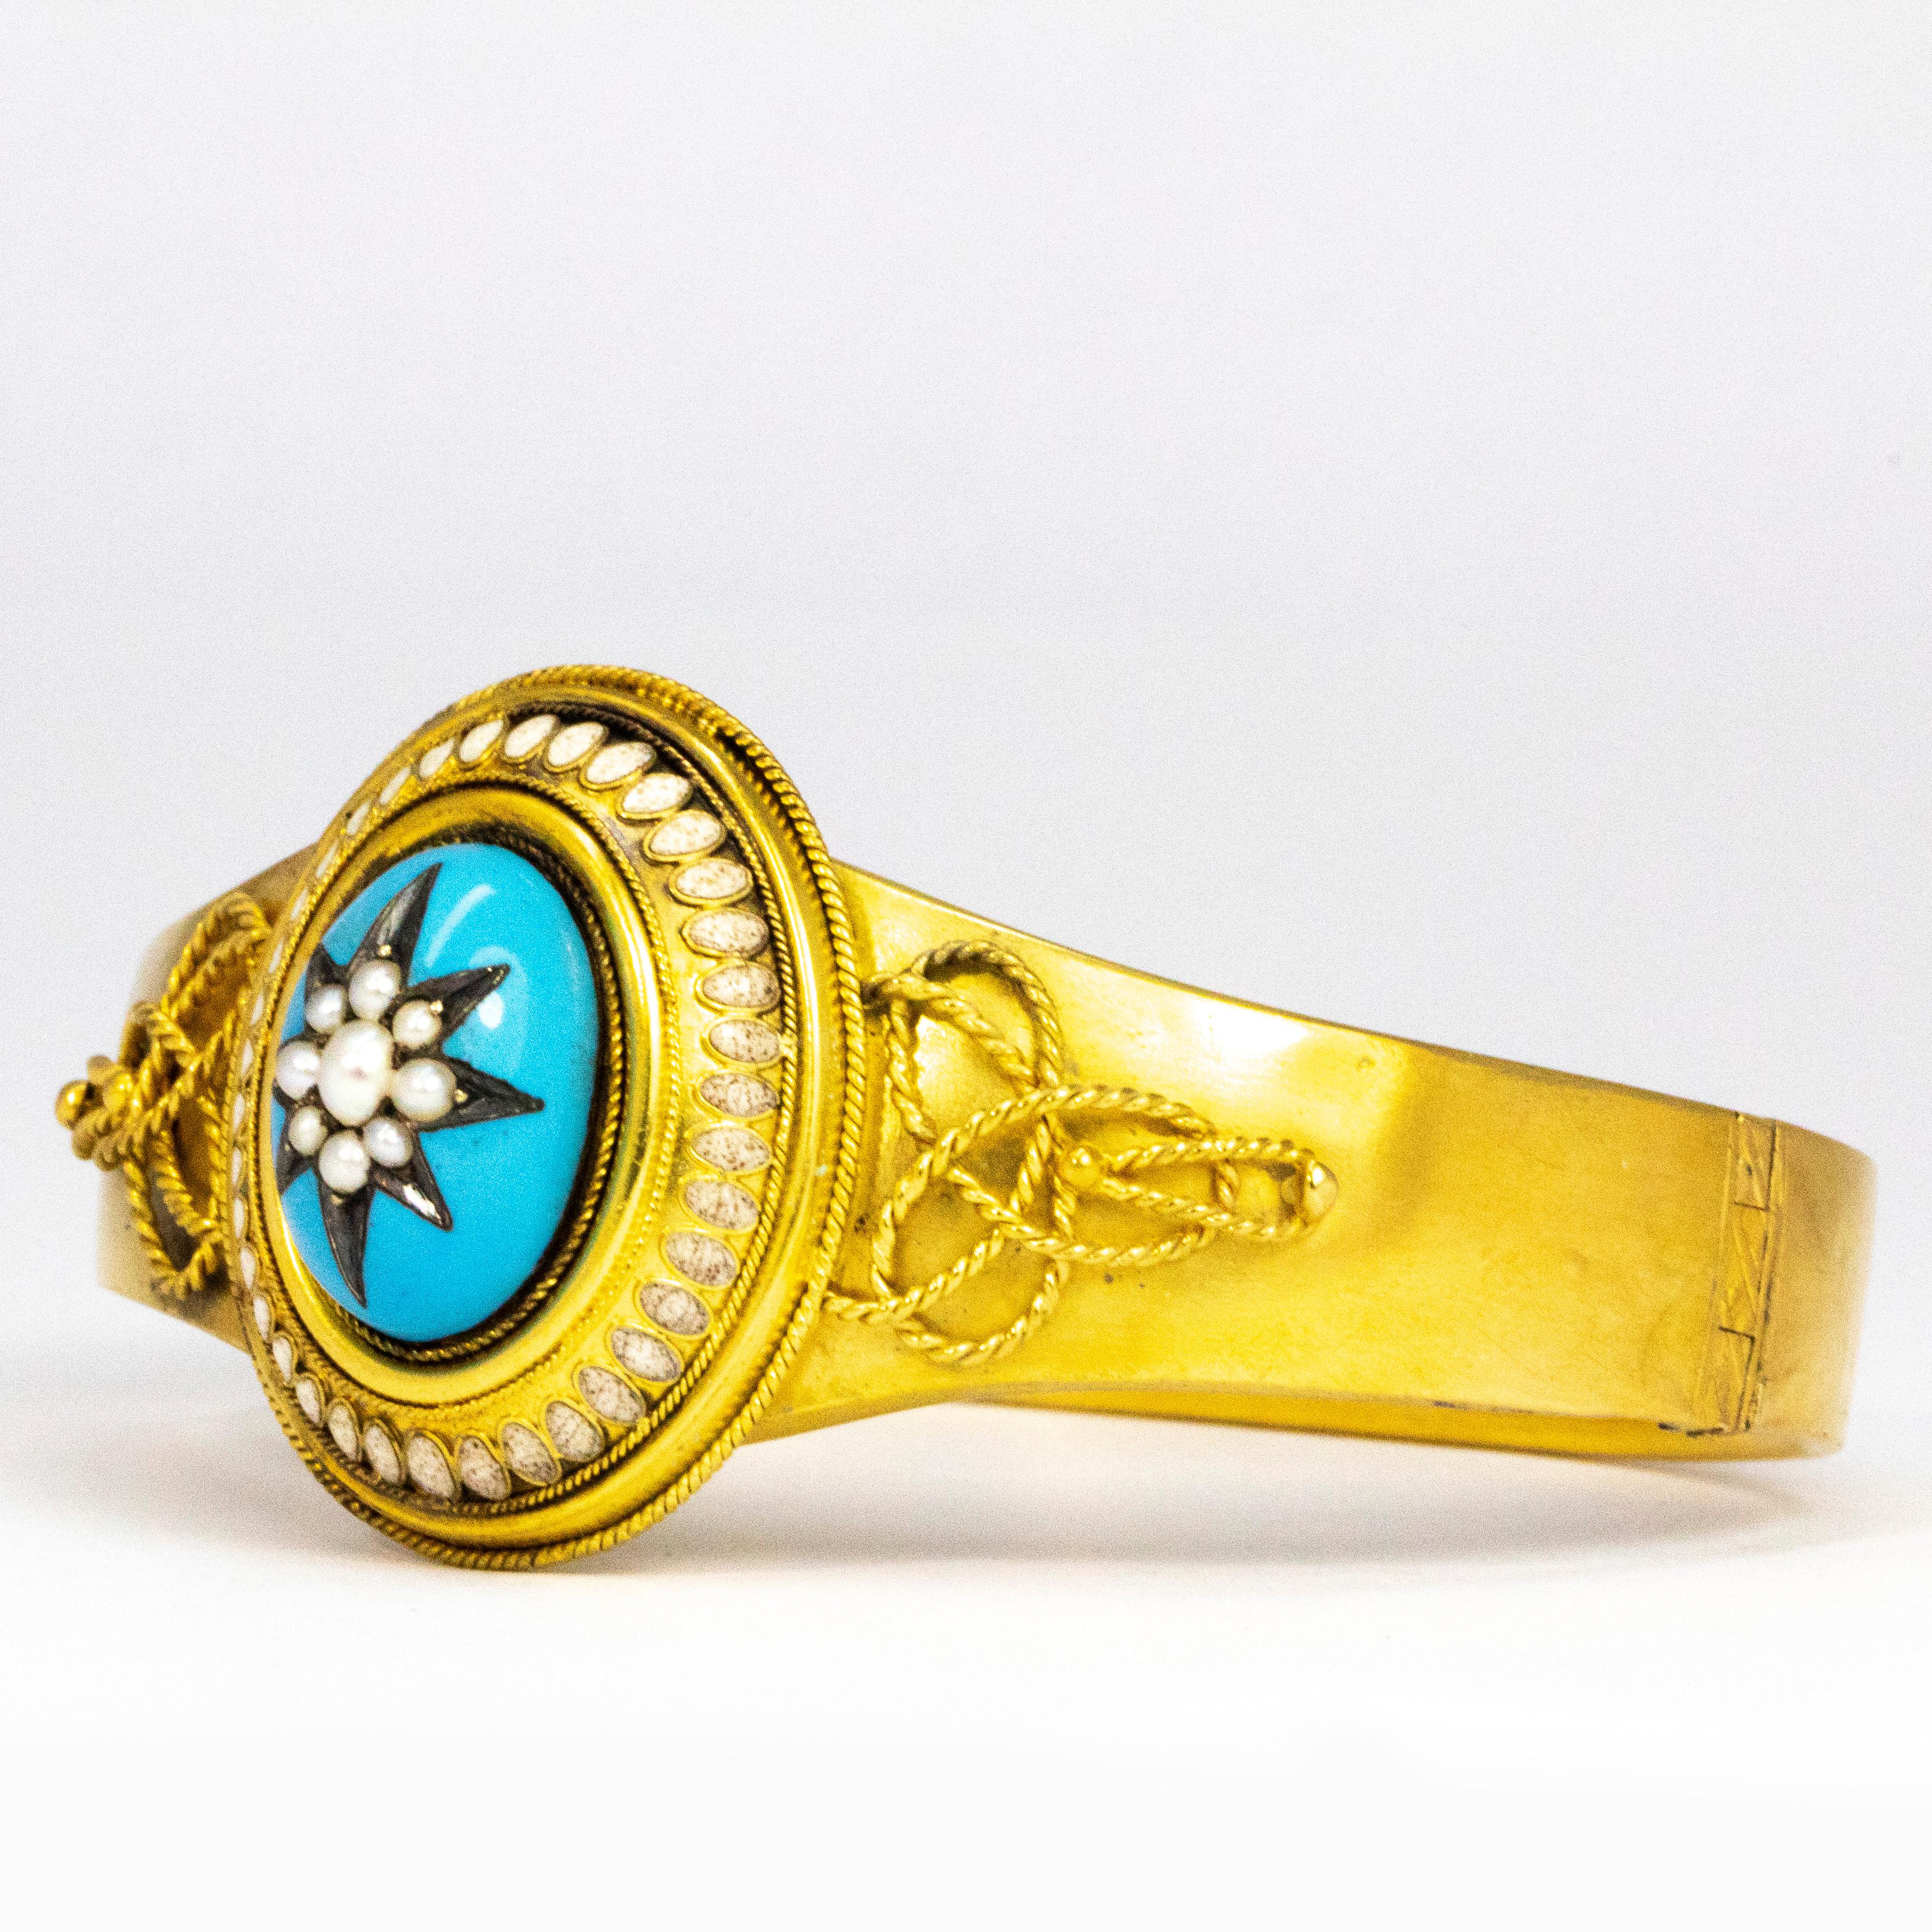 The pop of the blue enamel is stunning next to the bright yellow gold. At the centre of the blue enamel is a carved star encrusted with Perls and the frame around the outside also features a pearl halo. The shoulders also have gorgeous fine chain